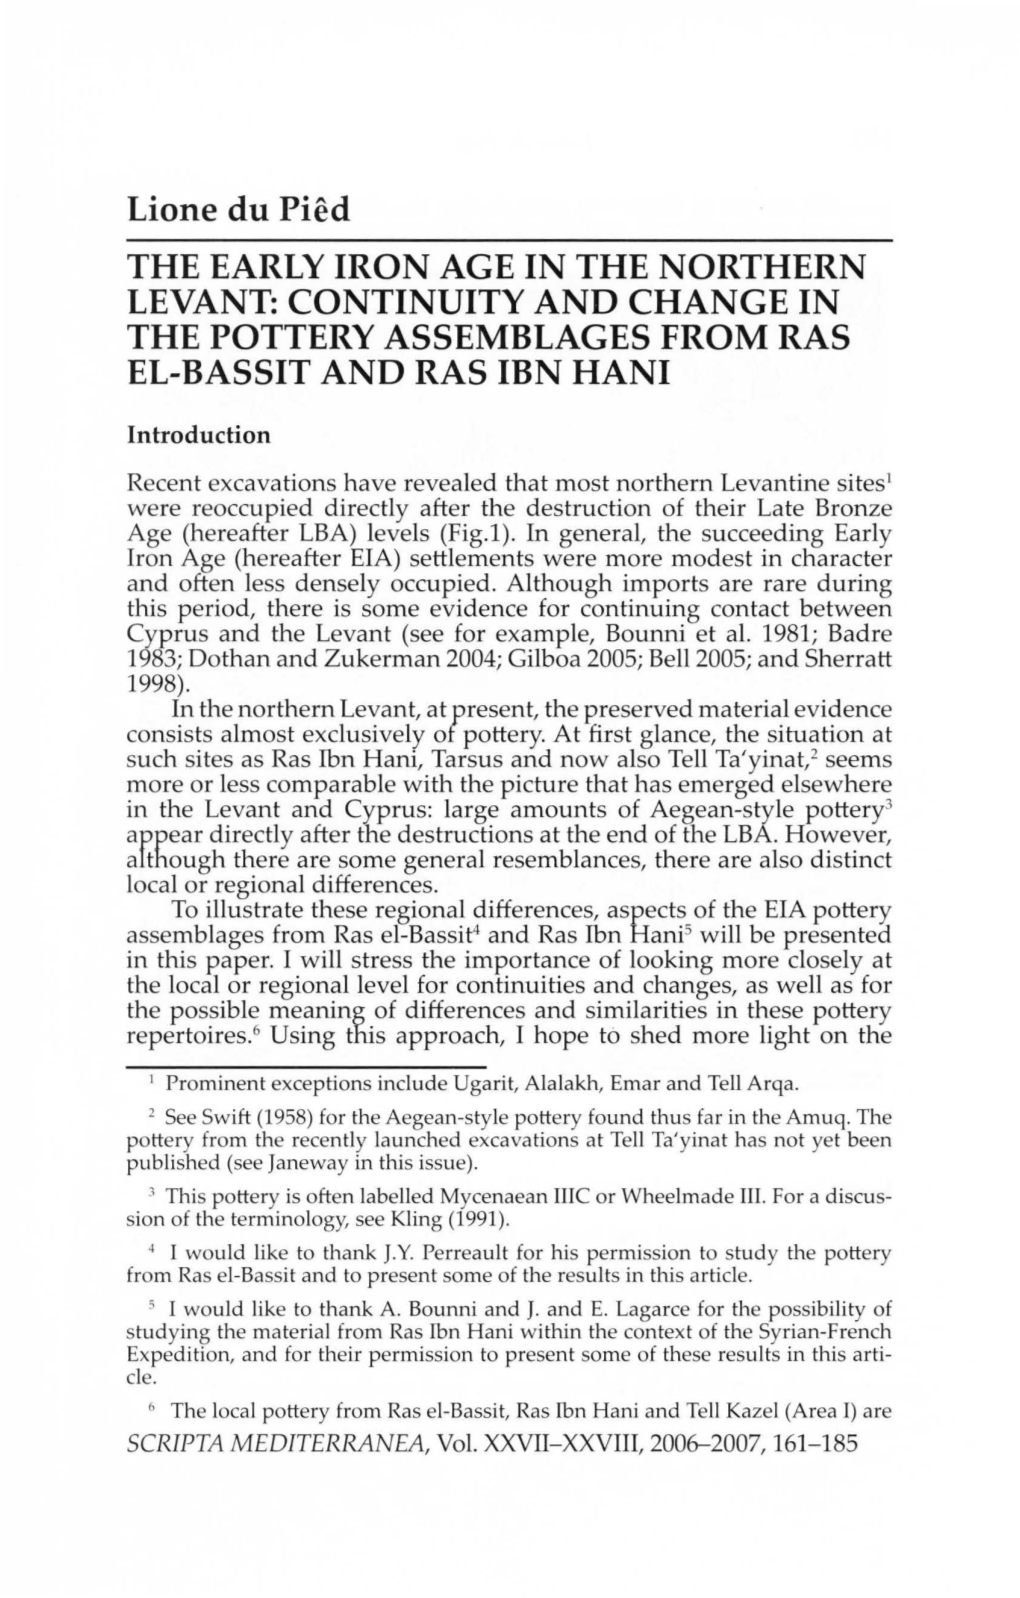 Lione Du Pied the EARLY IRON AGE in the NORTHERN LEVANT: CONTINUITY and CHANGE in the POTTERY ASSEMBLAGES from RAS EL-BASSIT and RAS IBN HANI